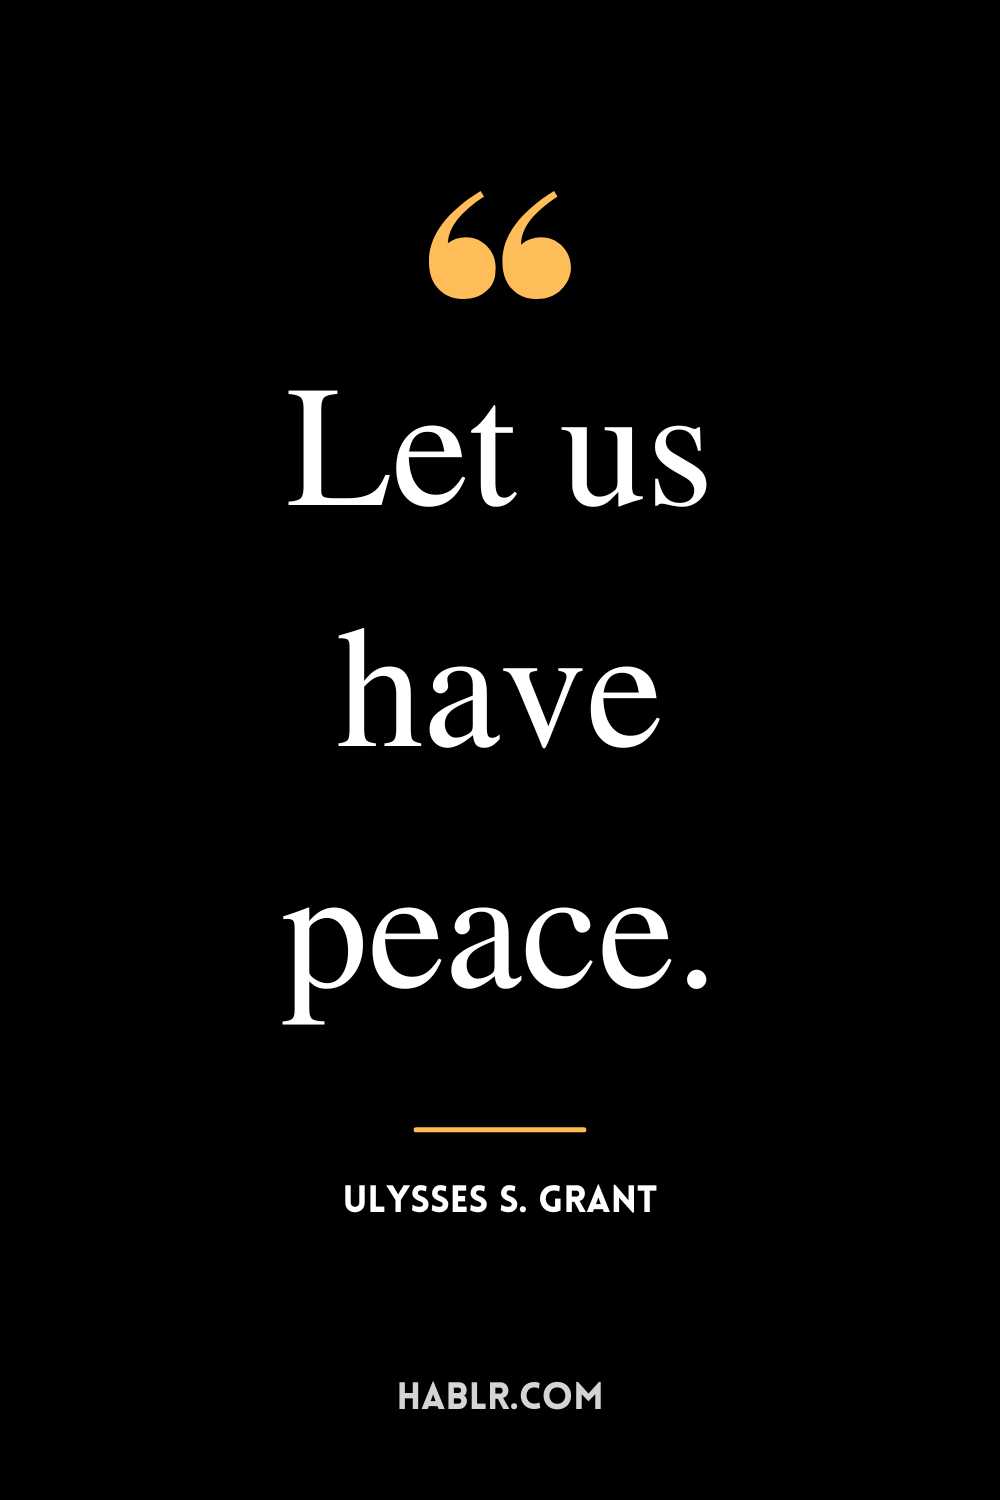 “Let us have peace.” -Ulysses S. Grant